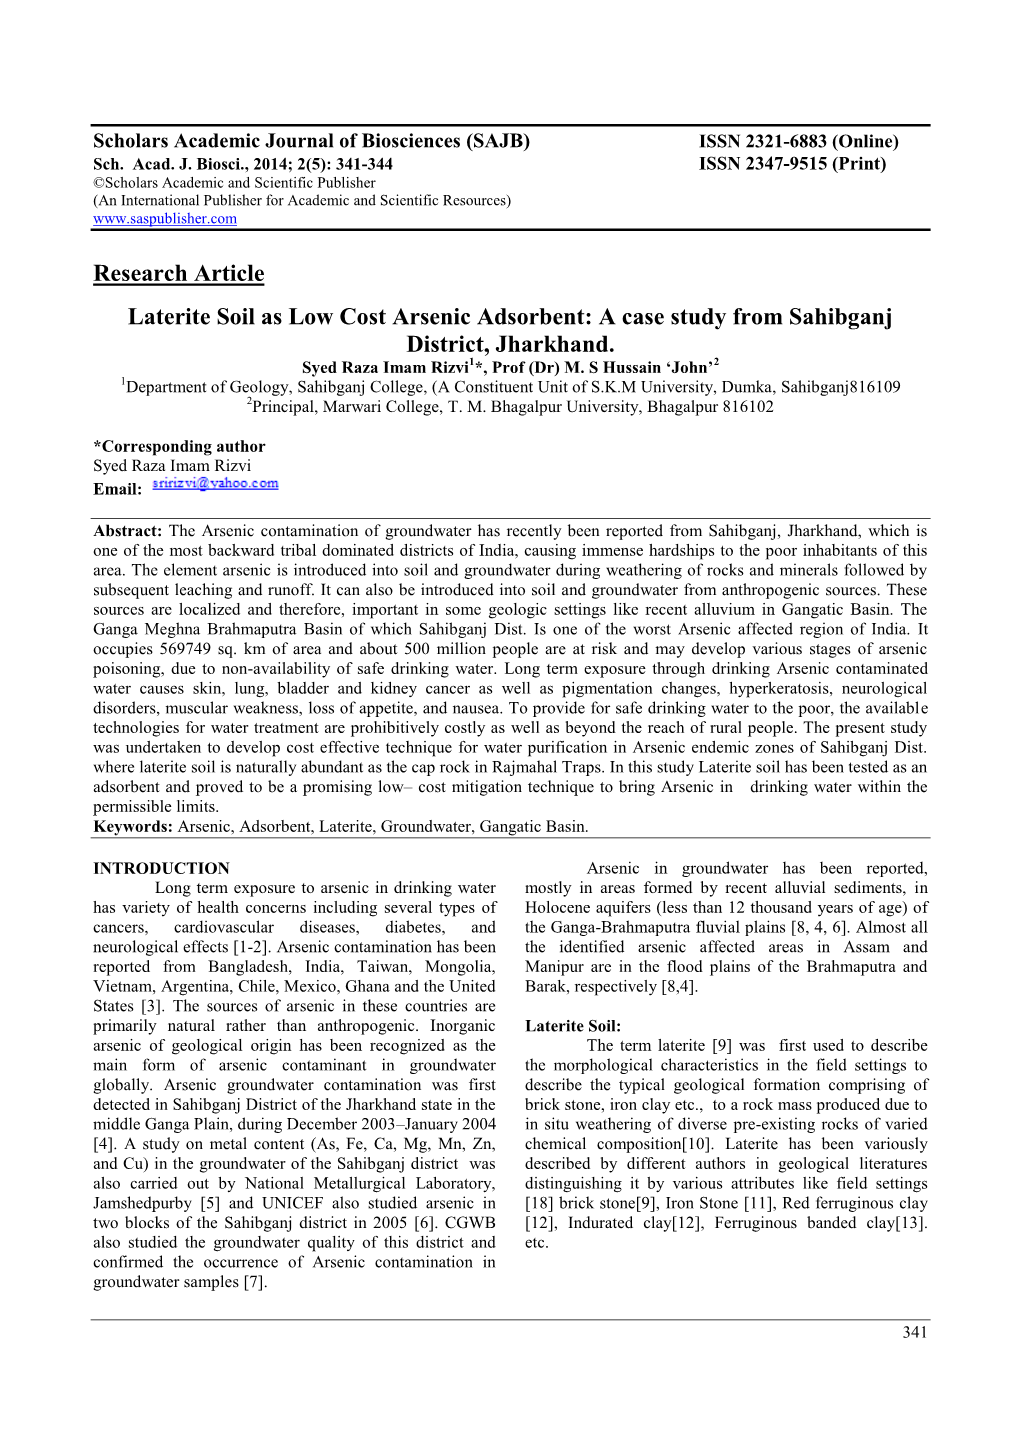 Research Article Laterite Soil As Low Cost Arsenic Adsorbent